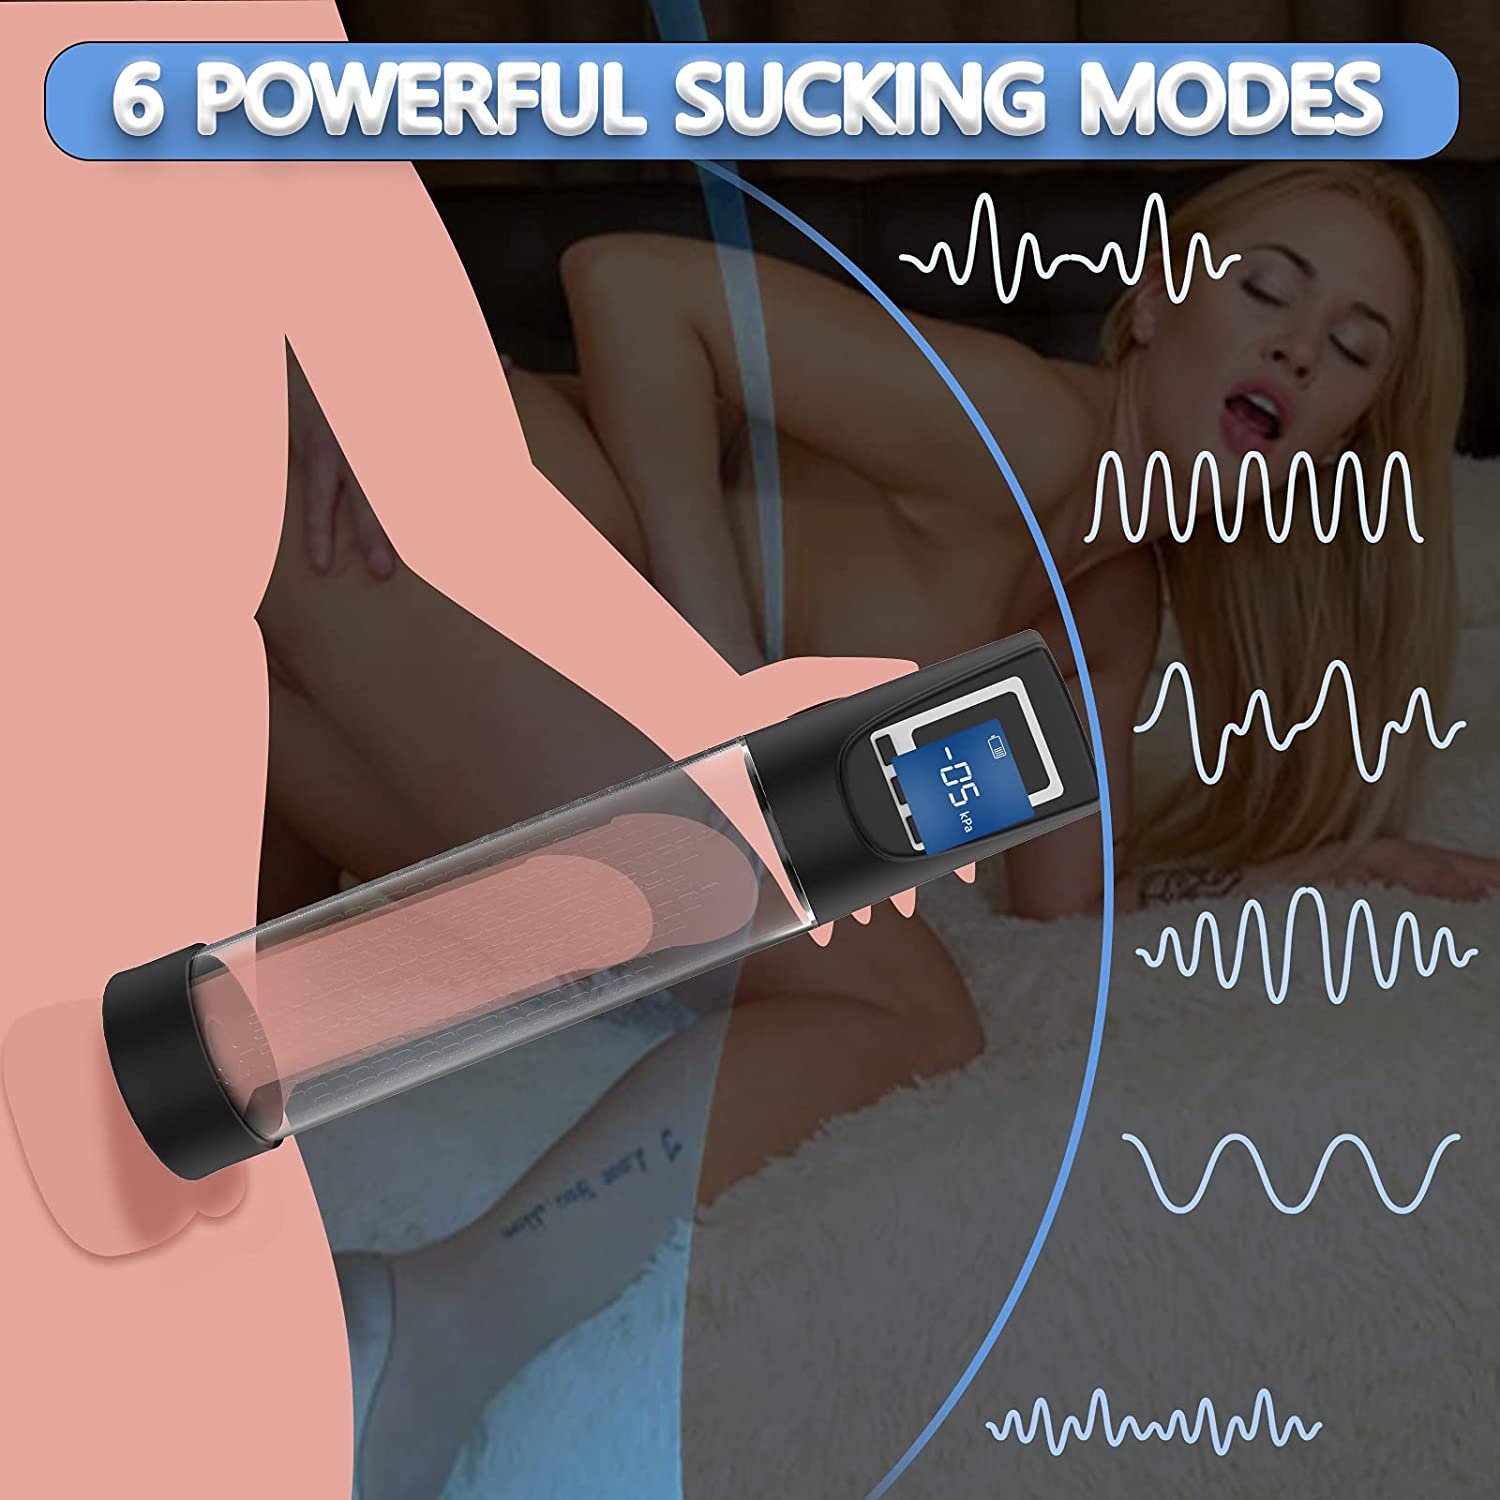 Vacuum Penis Pump with 6 Suction Electric Cock Enhancement for Stronger Bigger Erections Male Masturbator Sex Toy Penis Massager Stimulator with Vagina Stroker Sleeve Rechargeable & Detachable